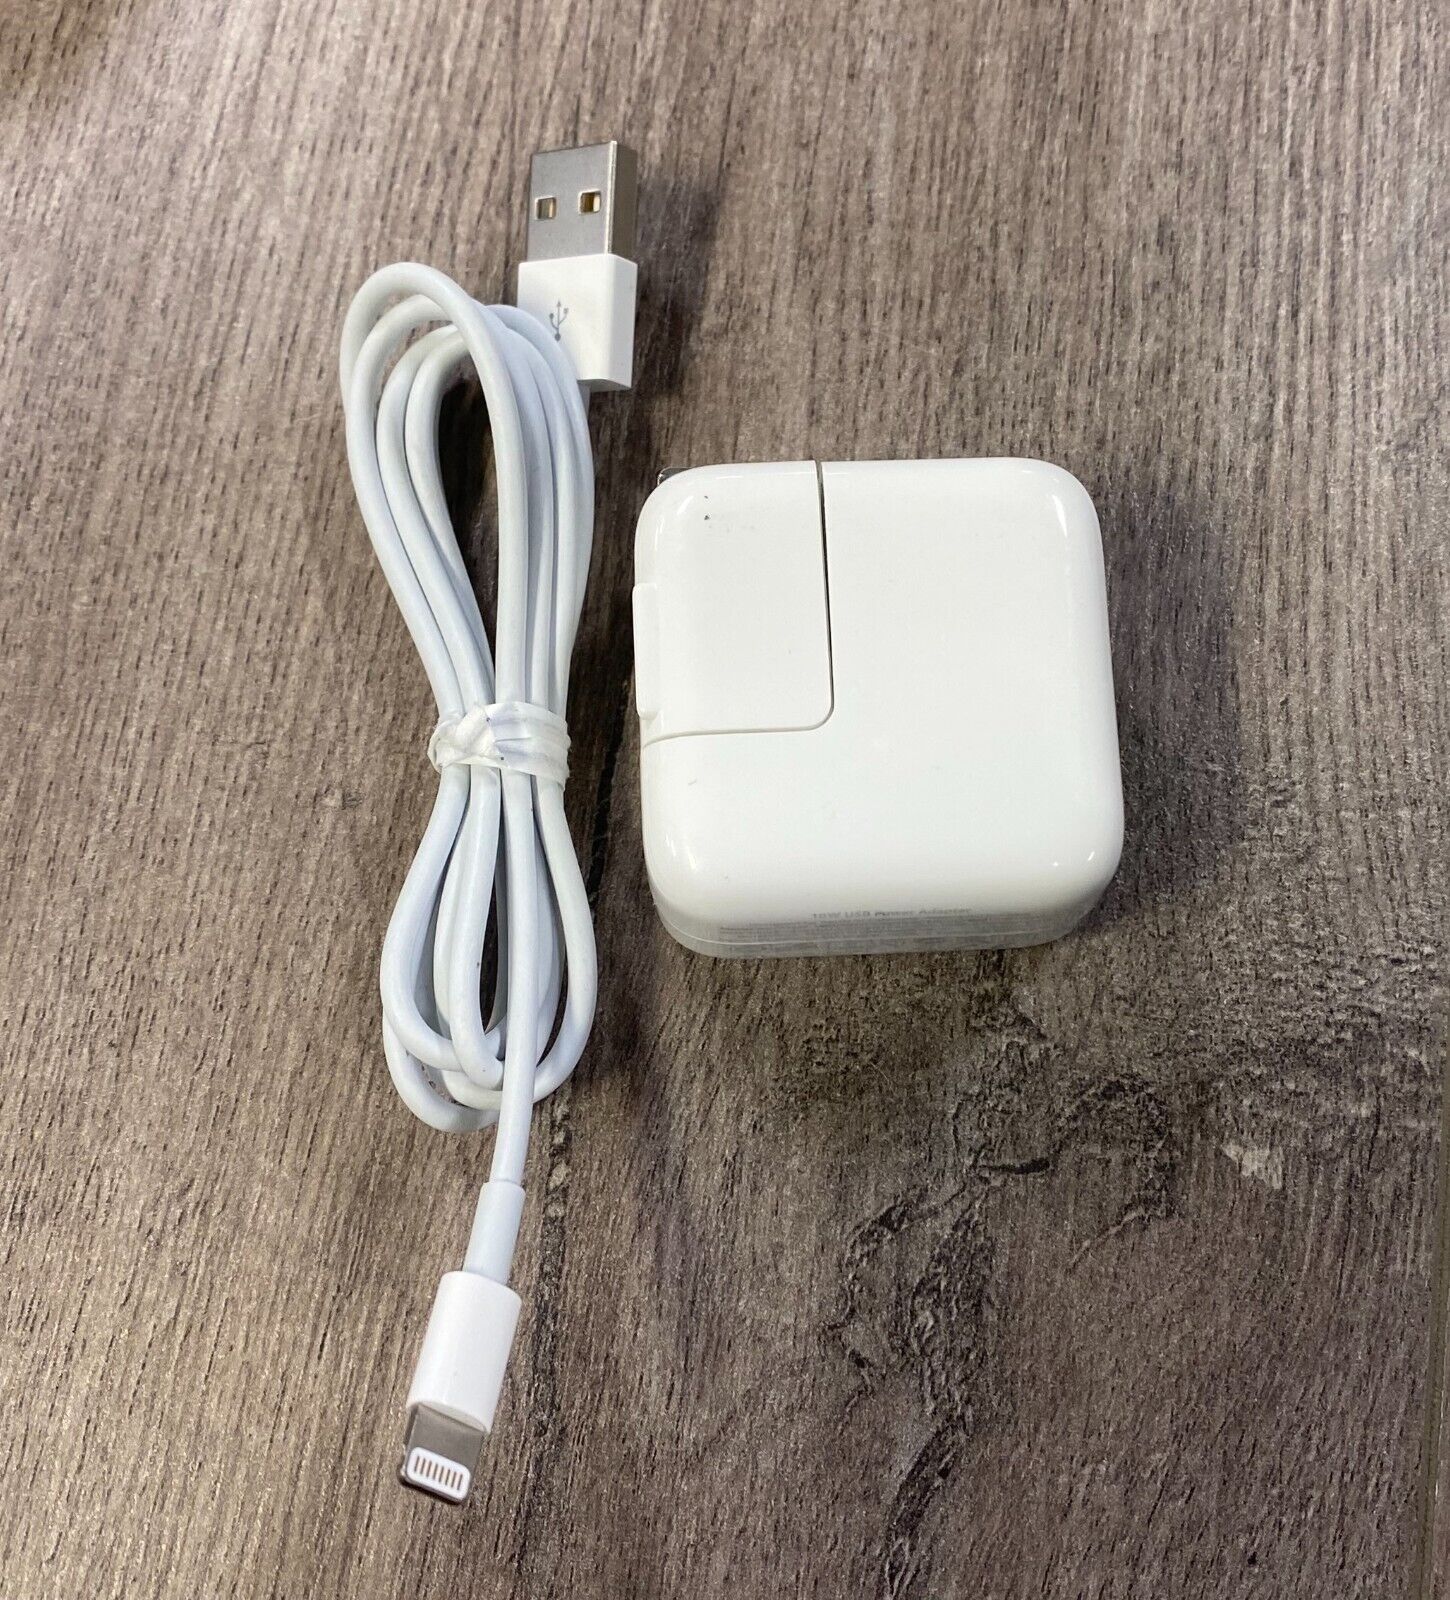 Apple 10w AUTHENTIC USB Wall Charger Adapter iPhone iPad with Lightning cable